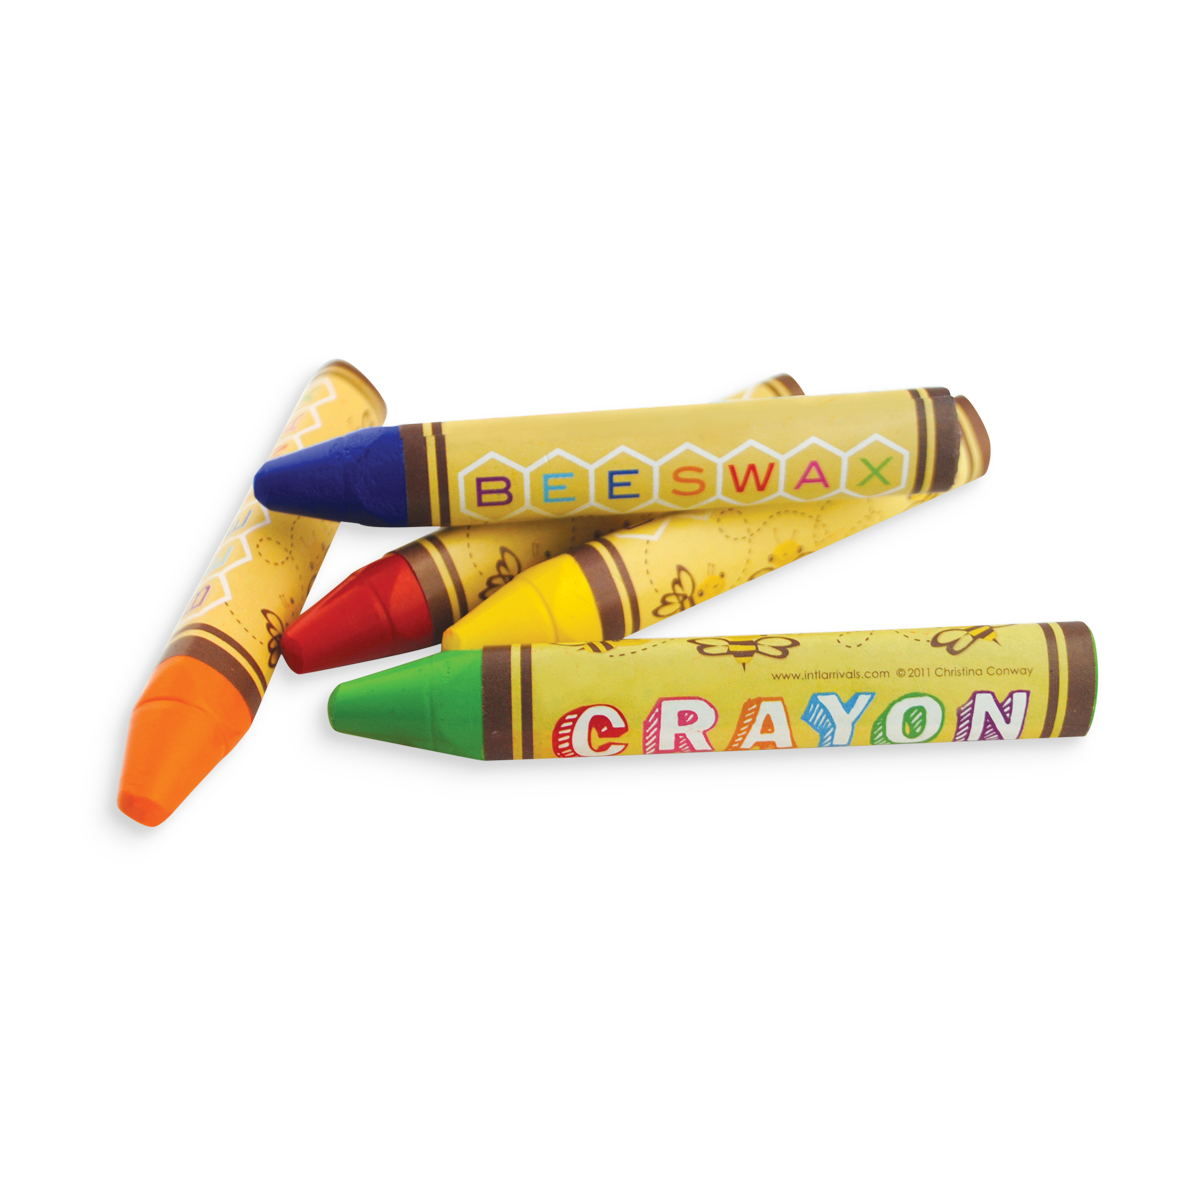 Great Choice Products 30 Pack Crayons Bulk,8 Colors Bulk Crayons,Jumbo  Crayons For Kids,Easy